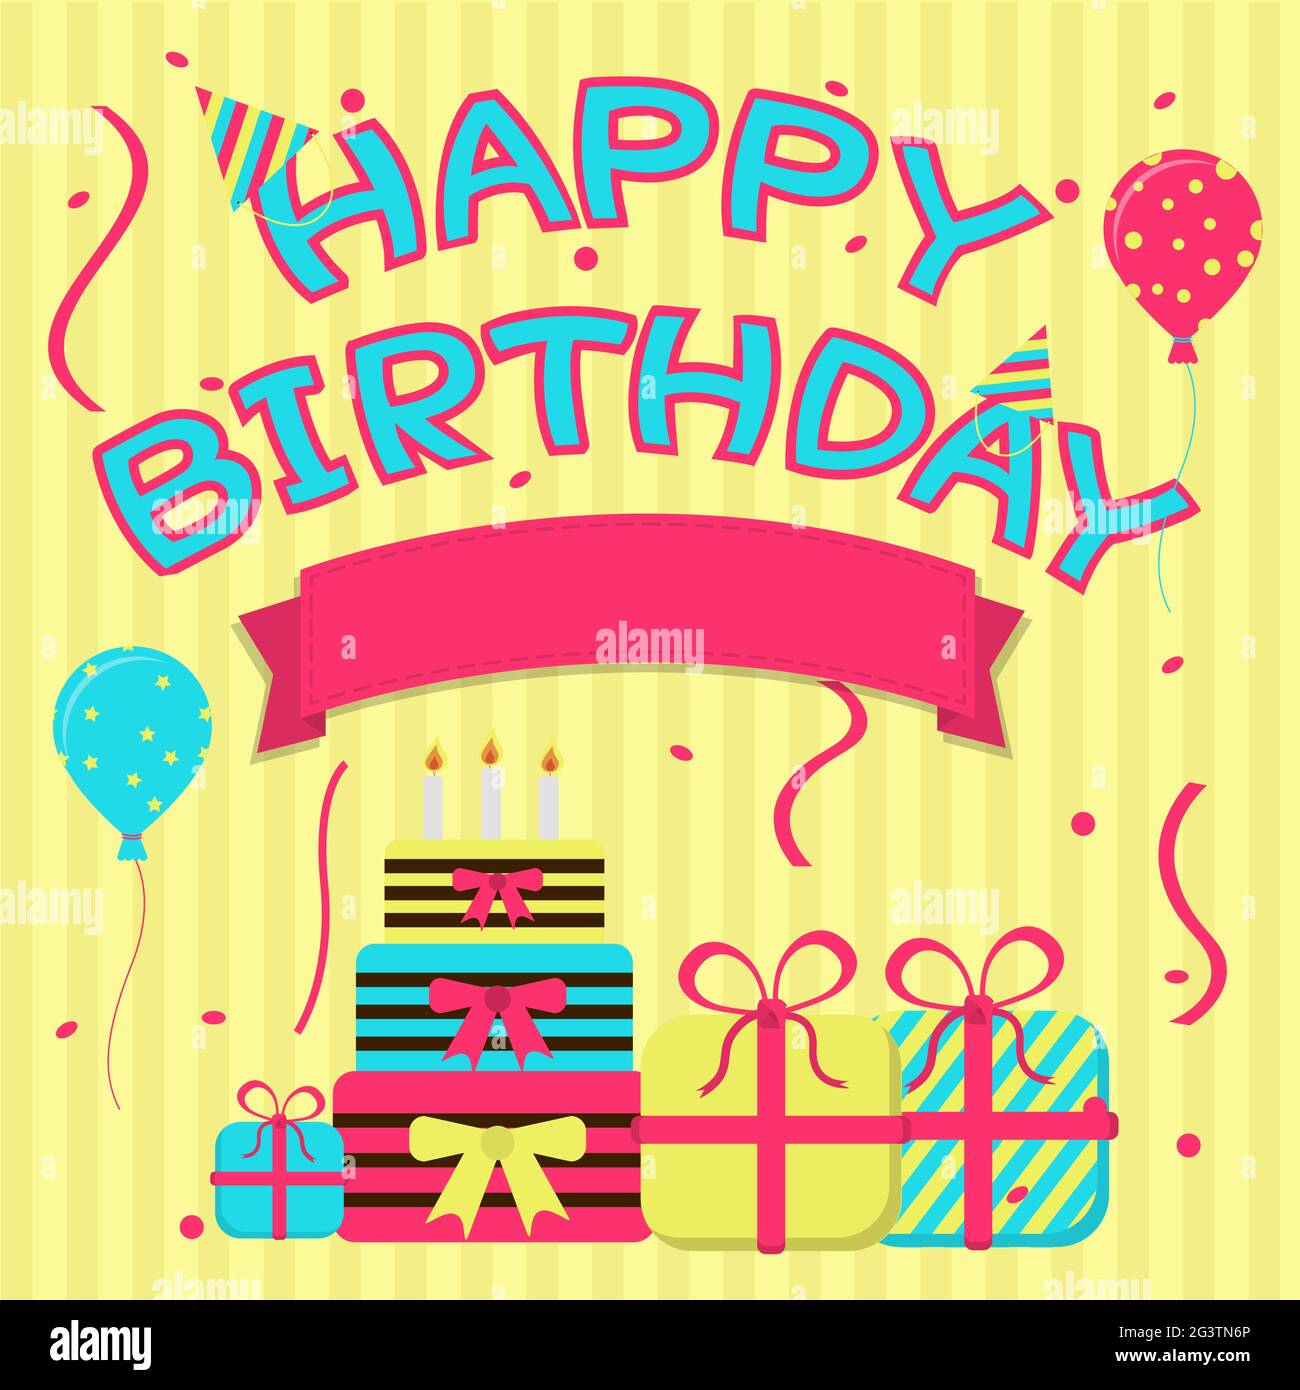 Happy birthday colorful card with a ribbon to enter text. Cake and presents Stock Vector